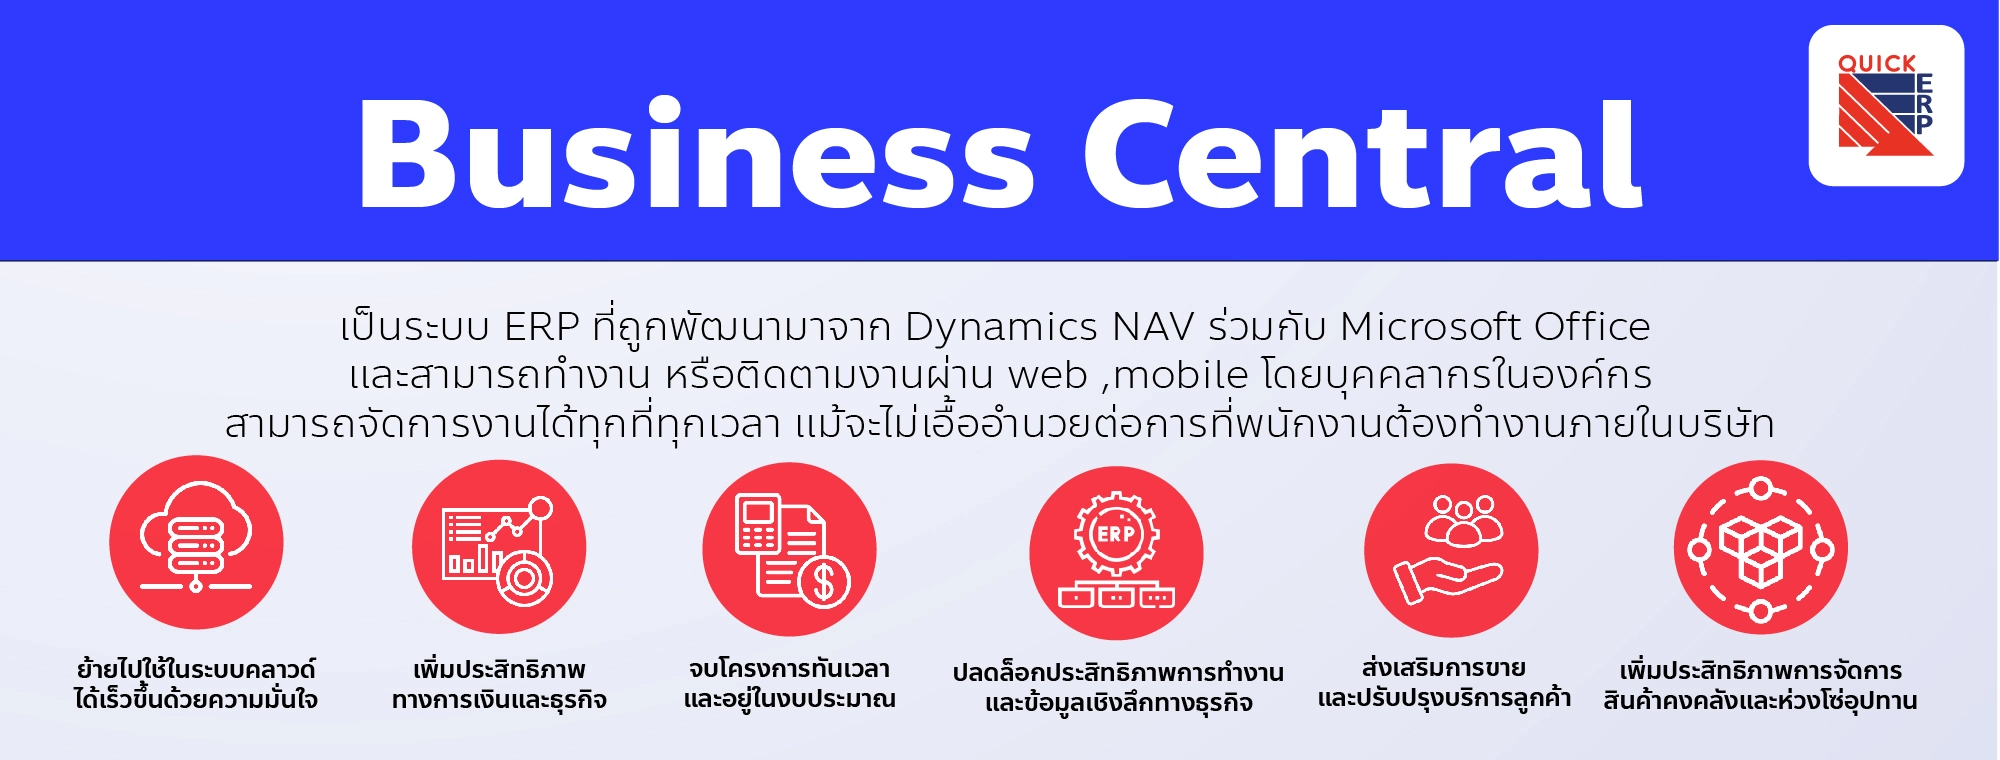 Business Central 1